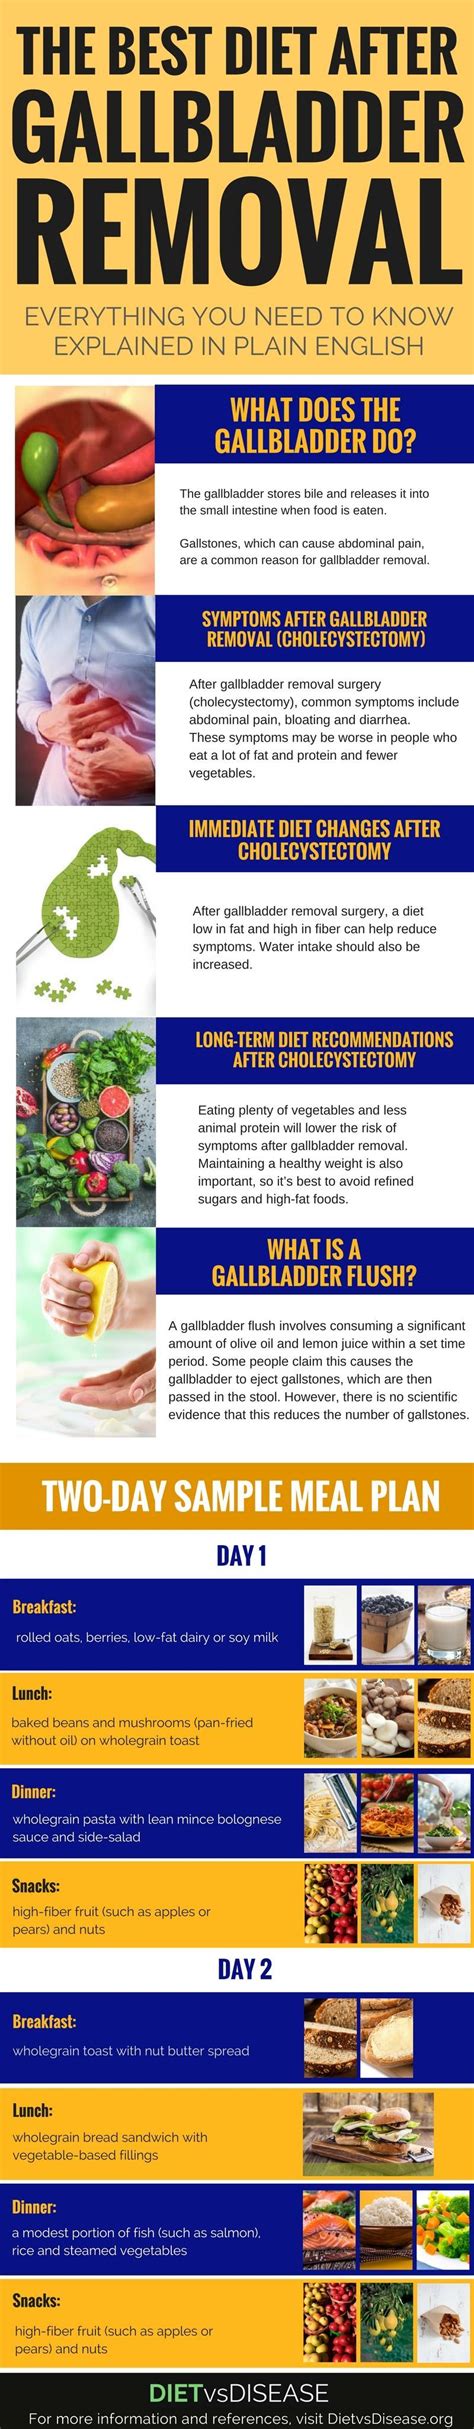 The Best Diet After Gallbladder Removal: Everything You Need to Know | Diet vs Disease ...